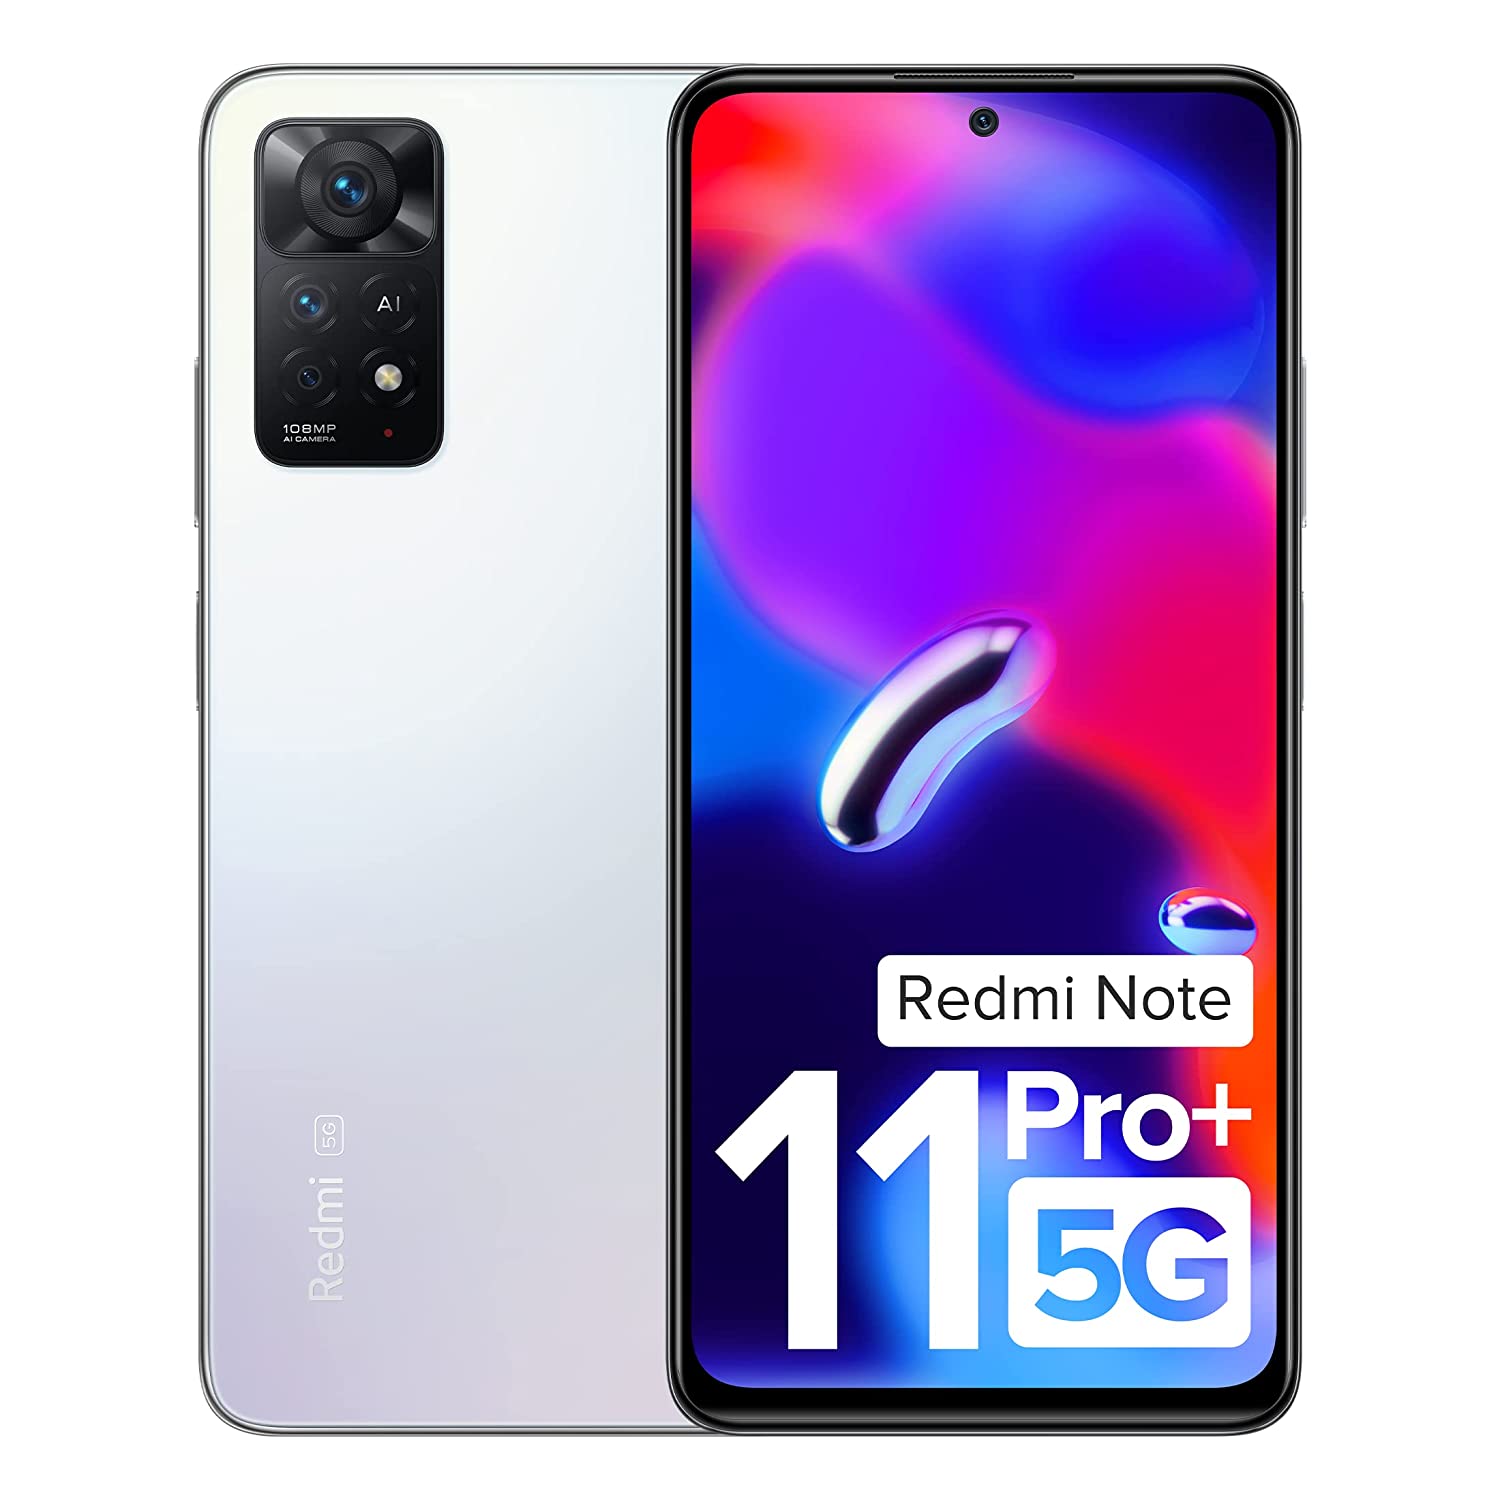 Redmi Note 11 Pro + 5G (Phantom White, 8GB RAM, 256GB Storage) | 67W Turbo Charge | 120Hz Super AMOLED Display | Additional Exchange Offers Available | Charger Included